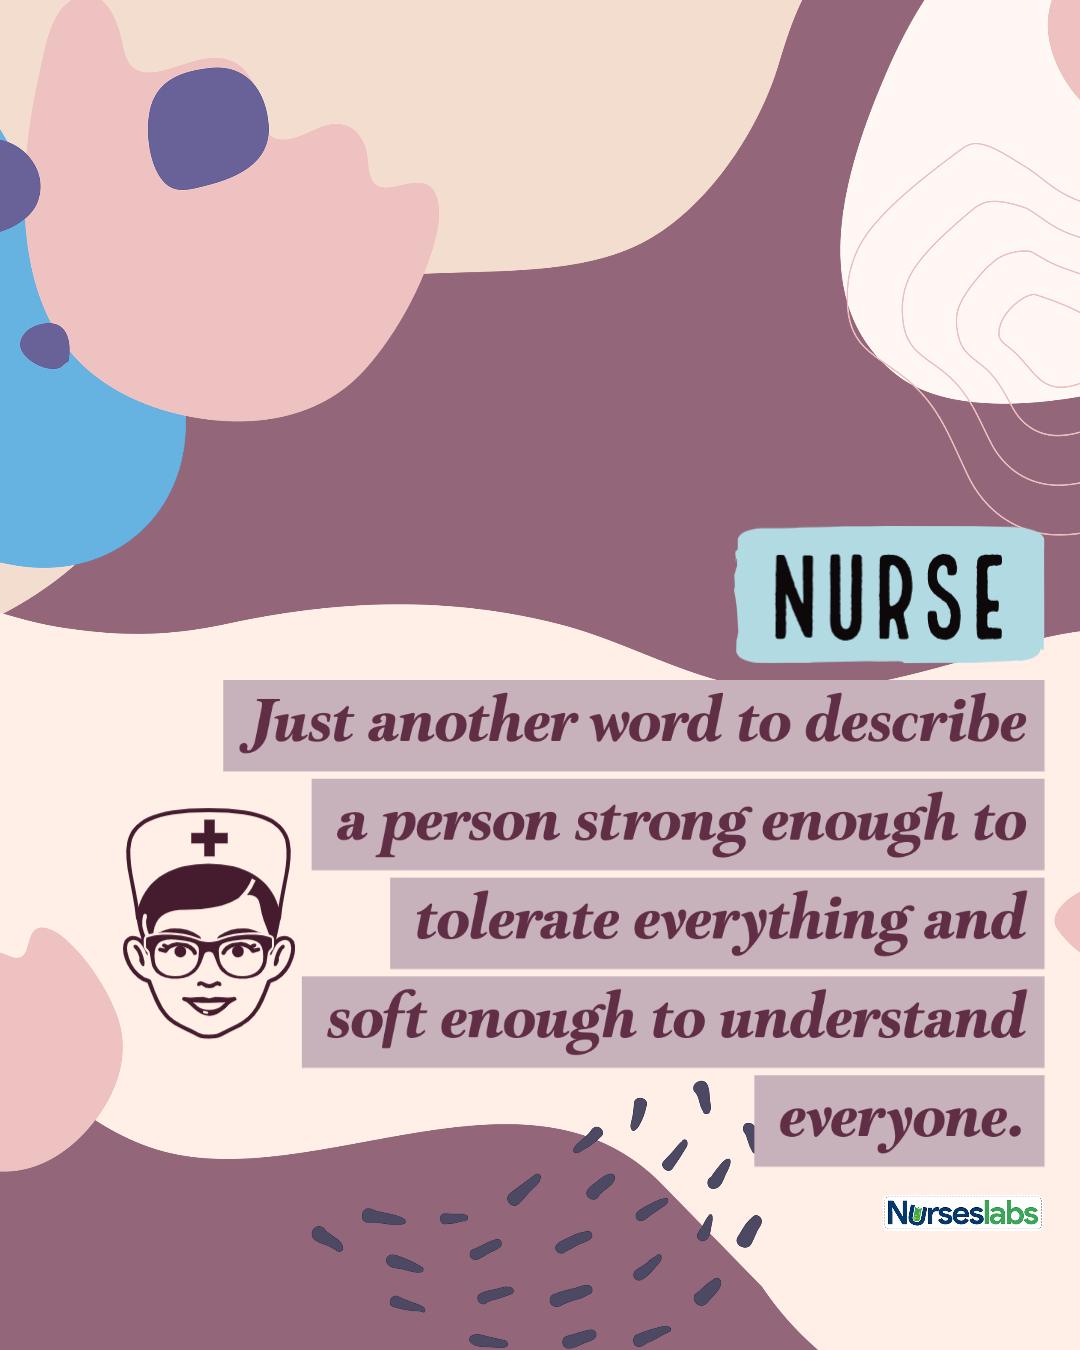 Nurse: Just another word to describe a person strong enough to tolerate everything and soft enough to understand everyone.